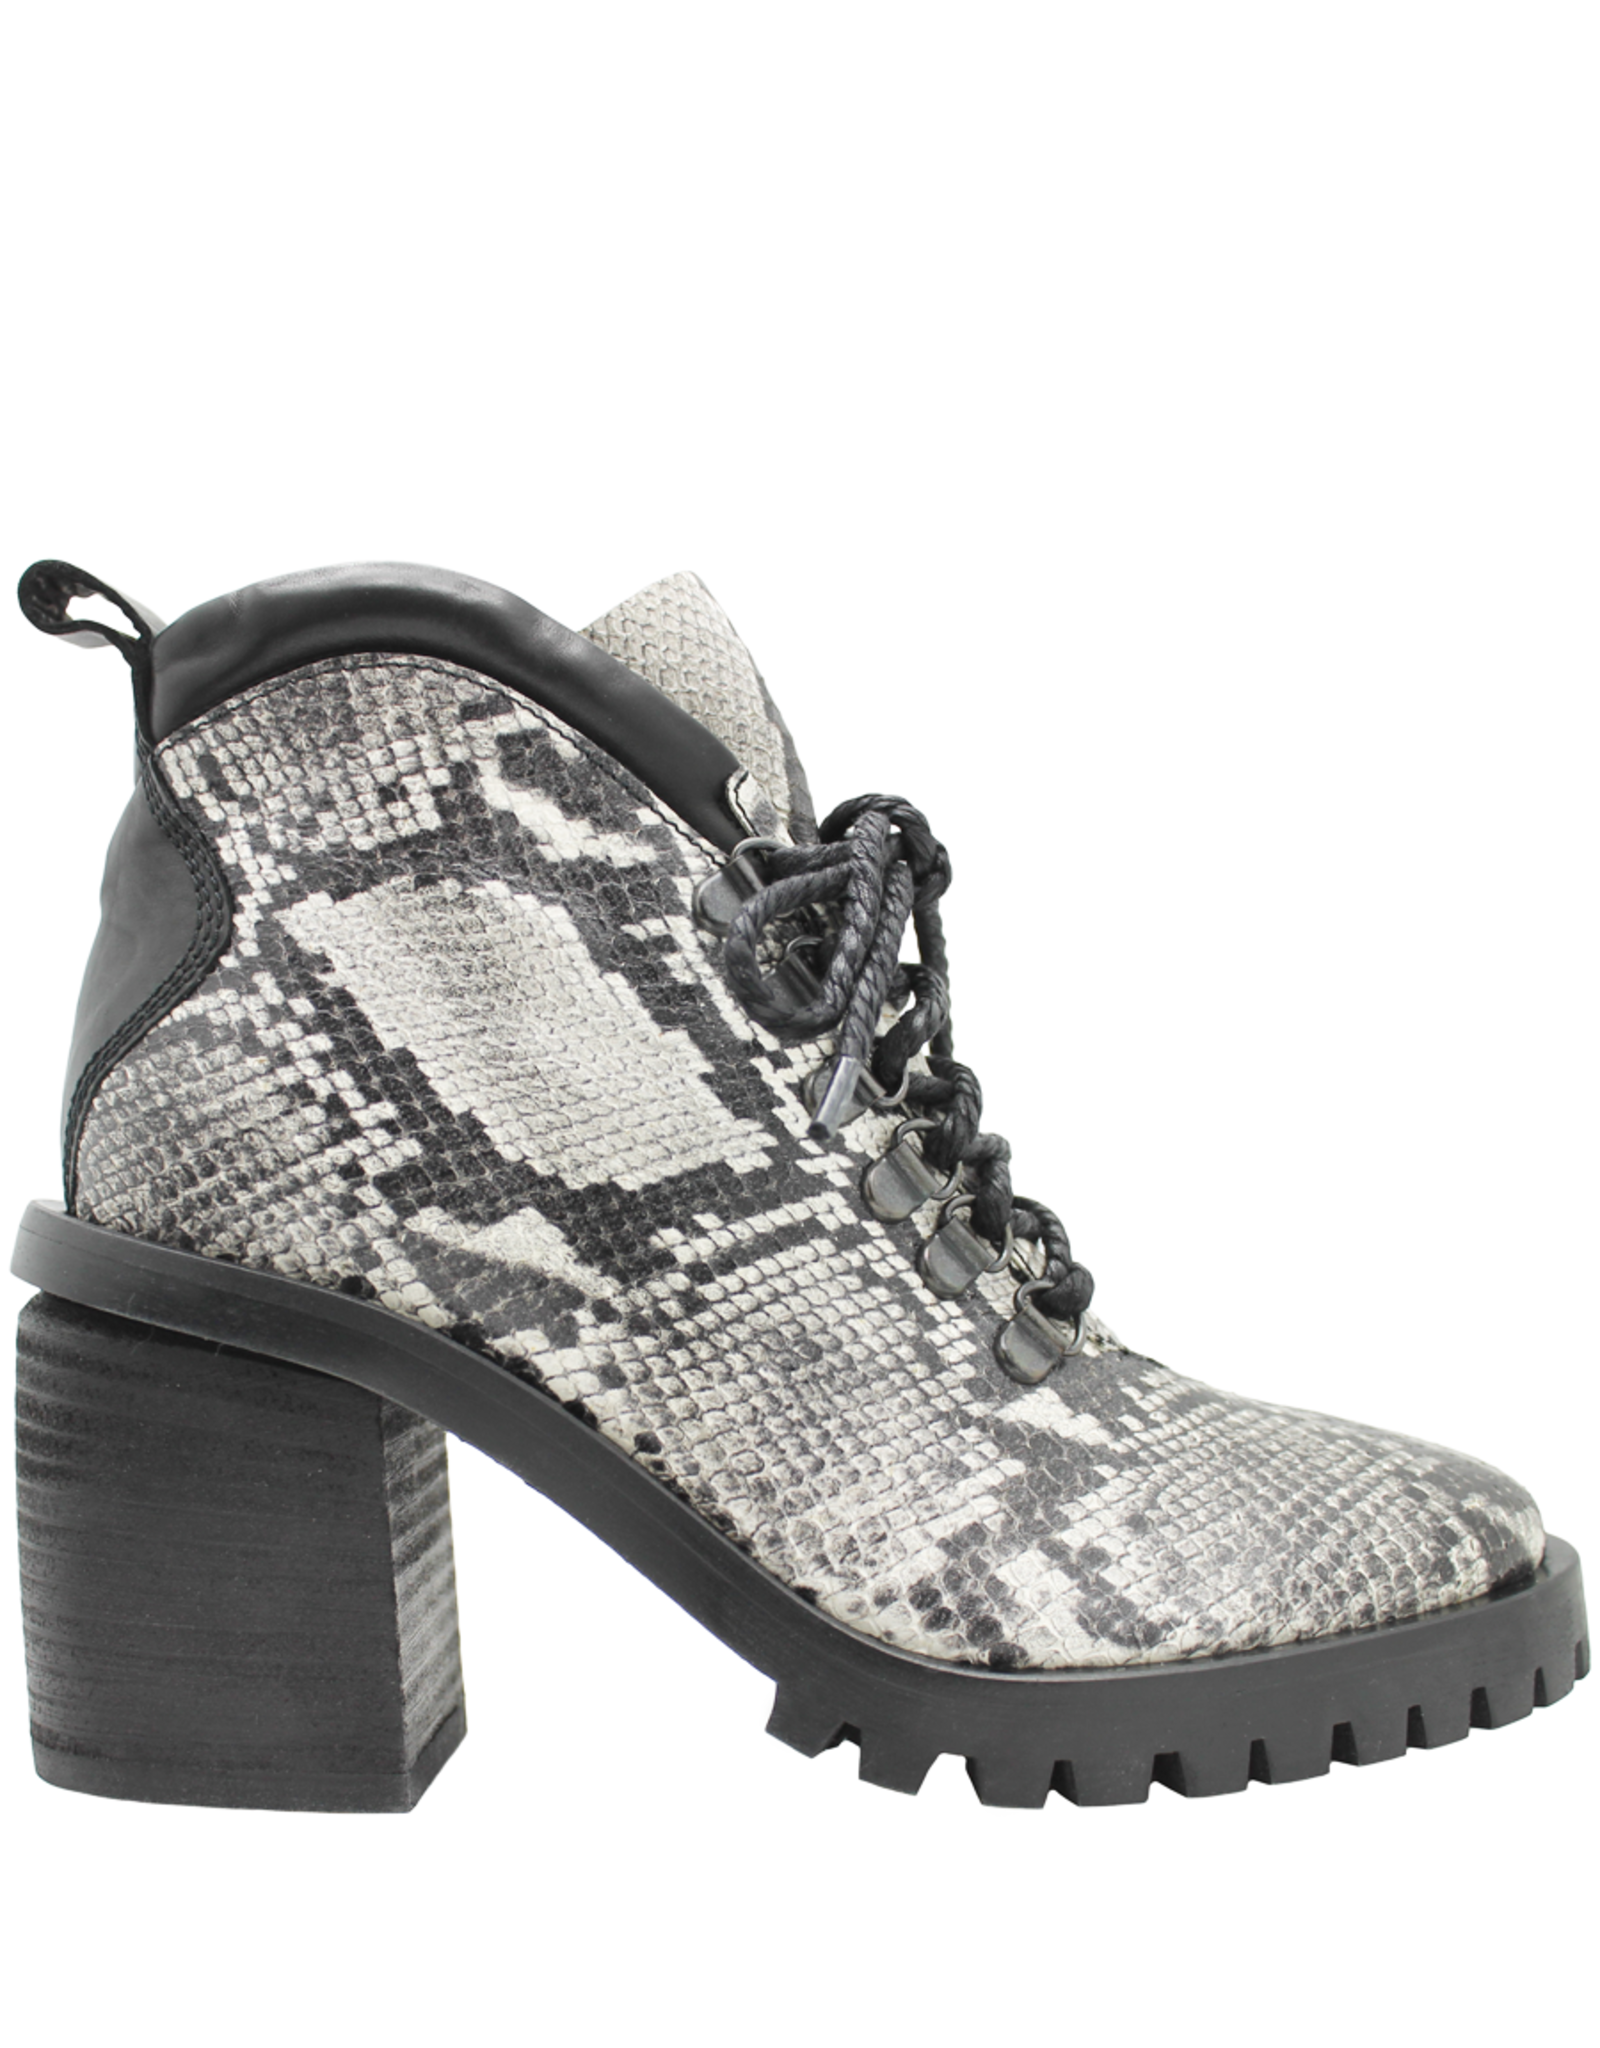 Now Now Snake Print Medium Heel Lace-Up Hiker Boot 5931